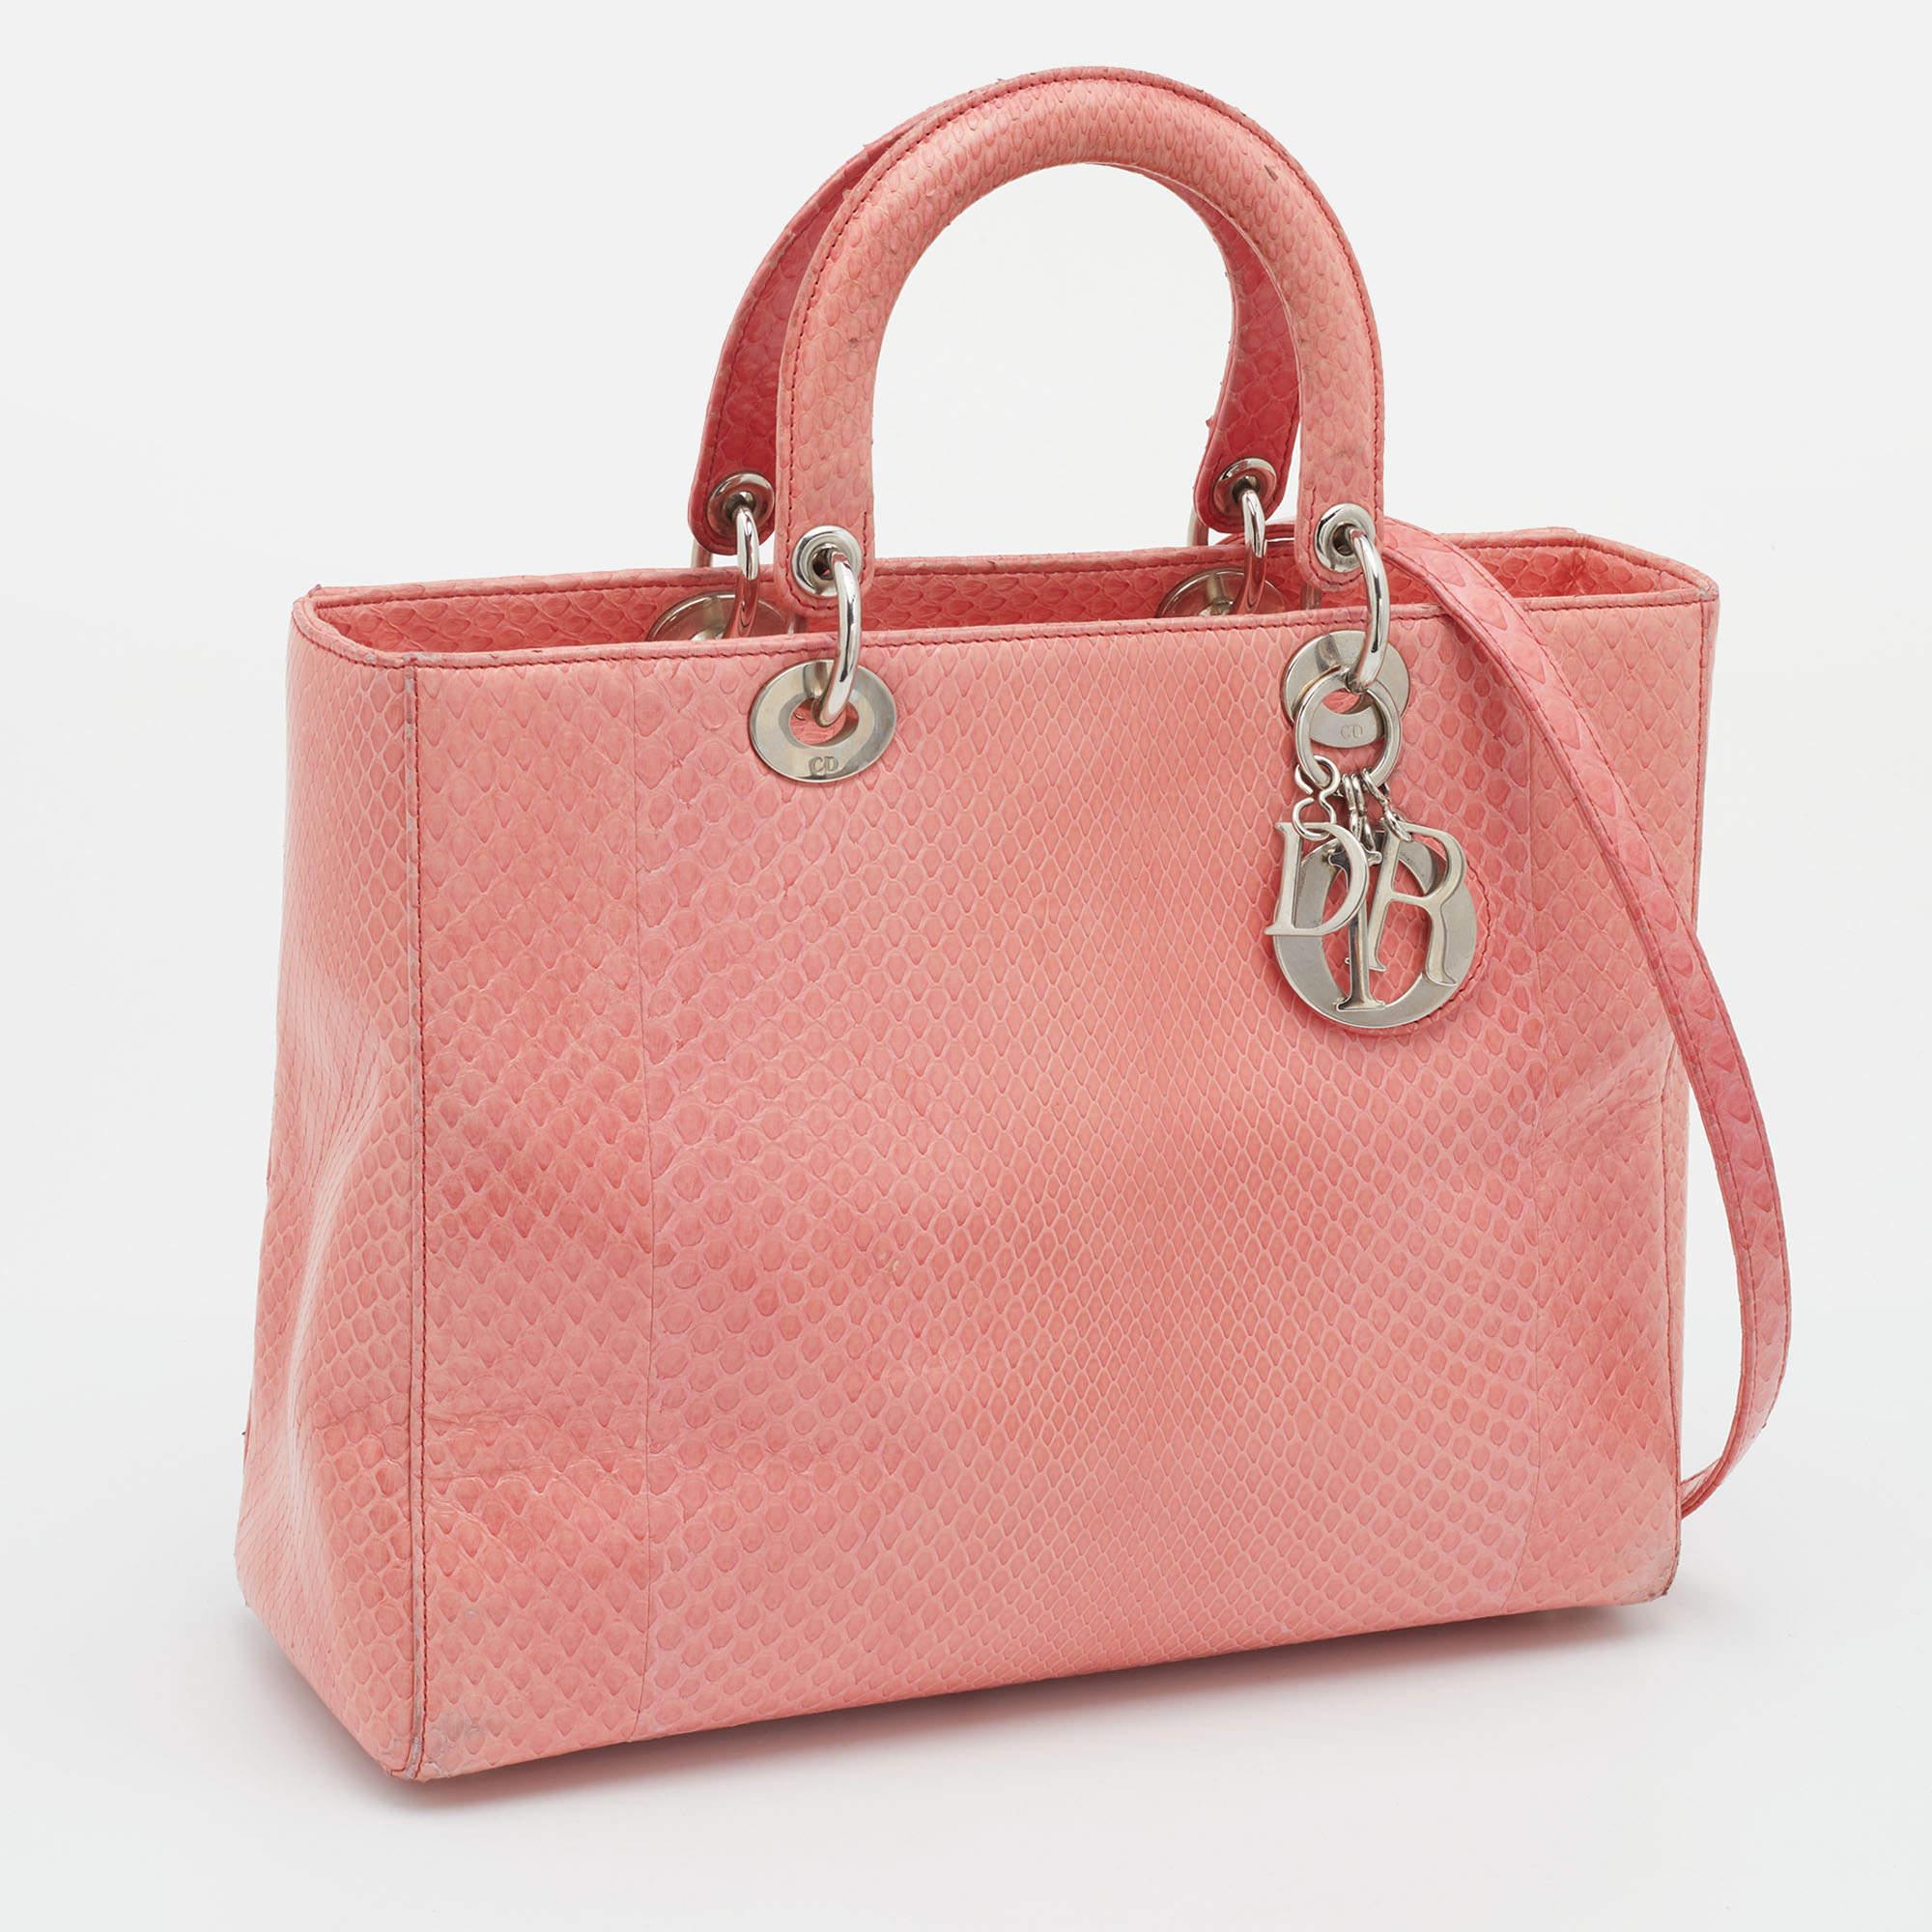 A timeless status and great design mark the Lady Dior tote. It is an iconic bag that people continue to invest in to this day. We have here this classic beauty crafted from peach python leather. The bag has a lined interior for your essentials. This